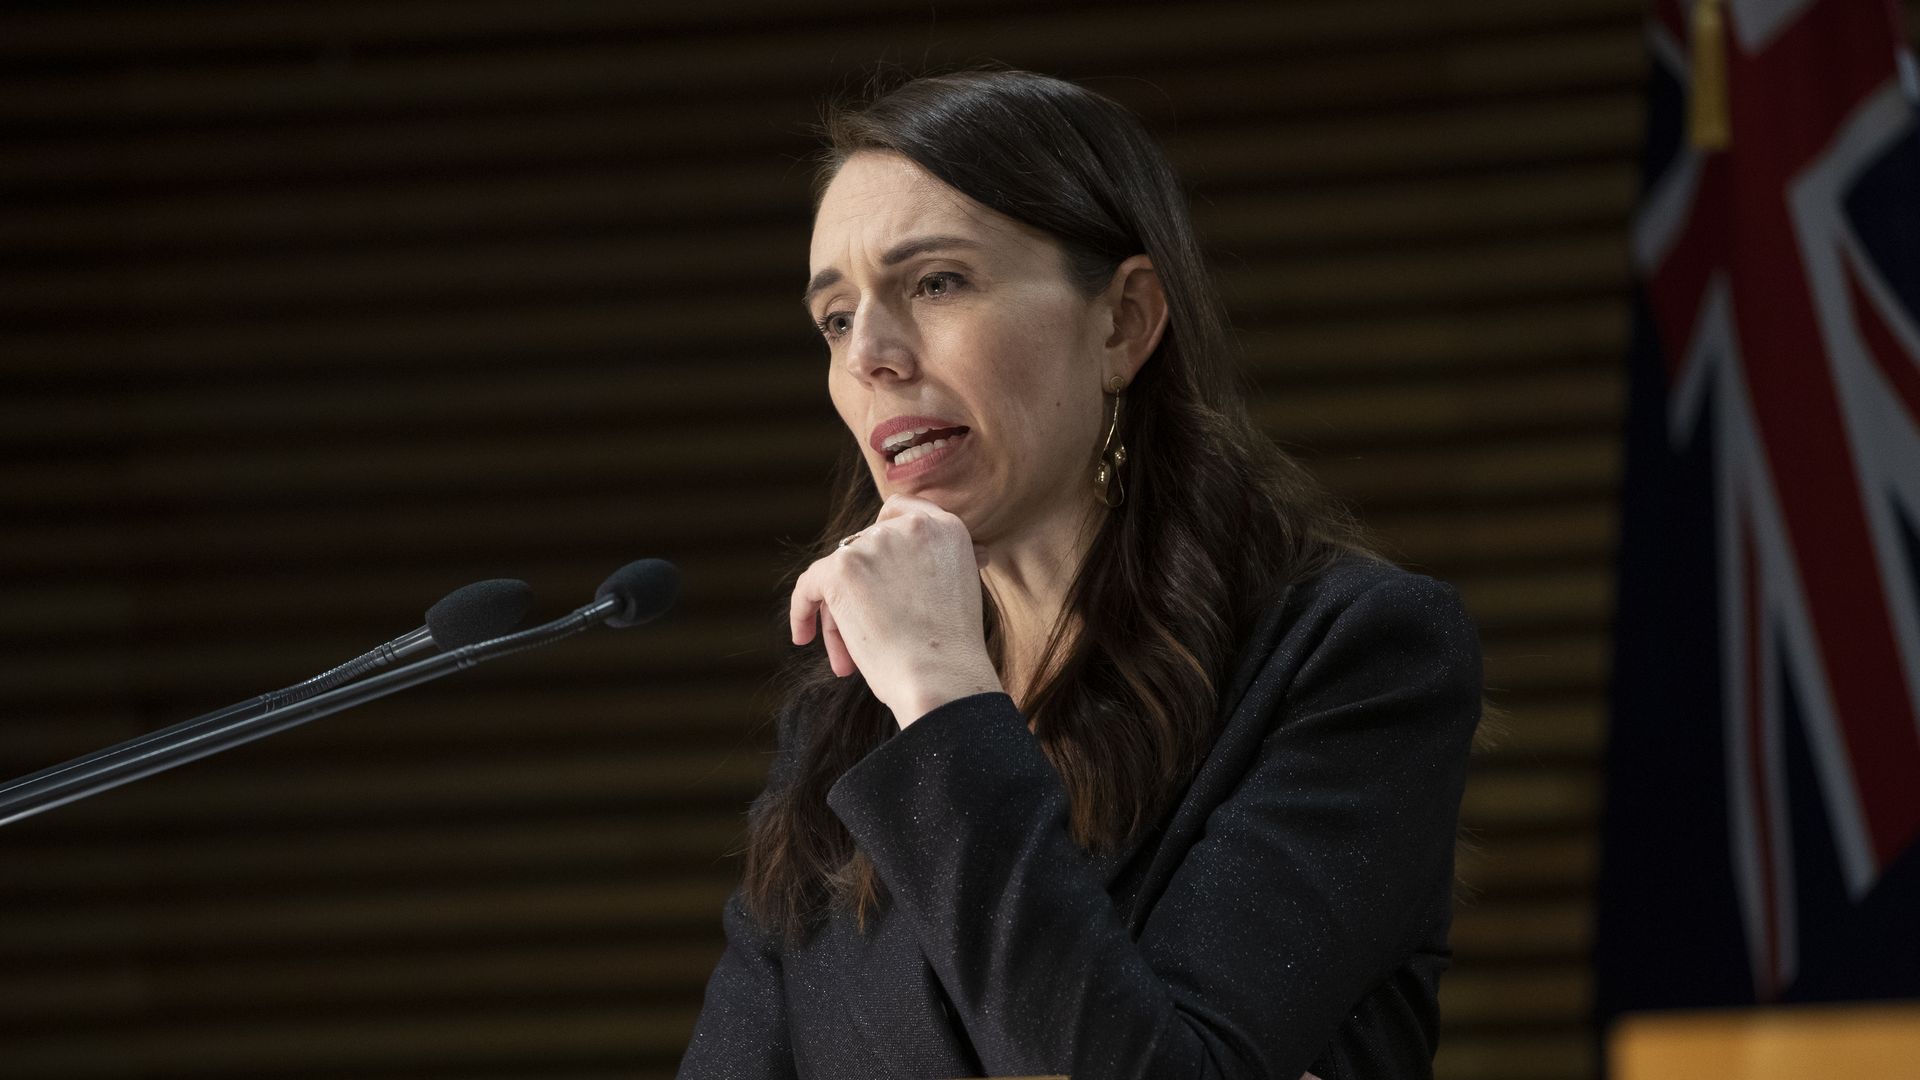 New Zealand Prime Minister Jacinda Ardern speaks during a COVID-19 response update at Parliament on August 18, 2021 in Wellington, New Zealand.